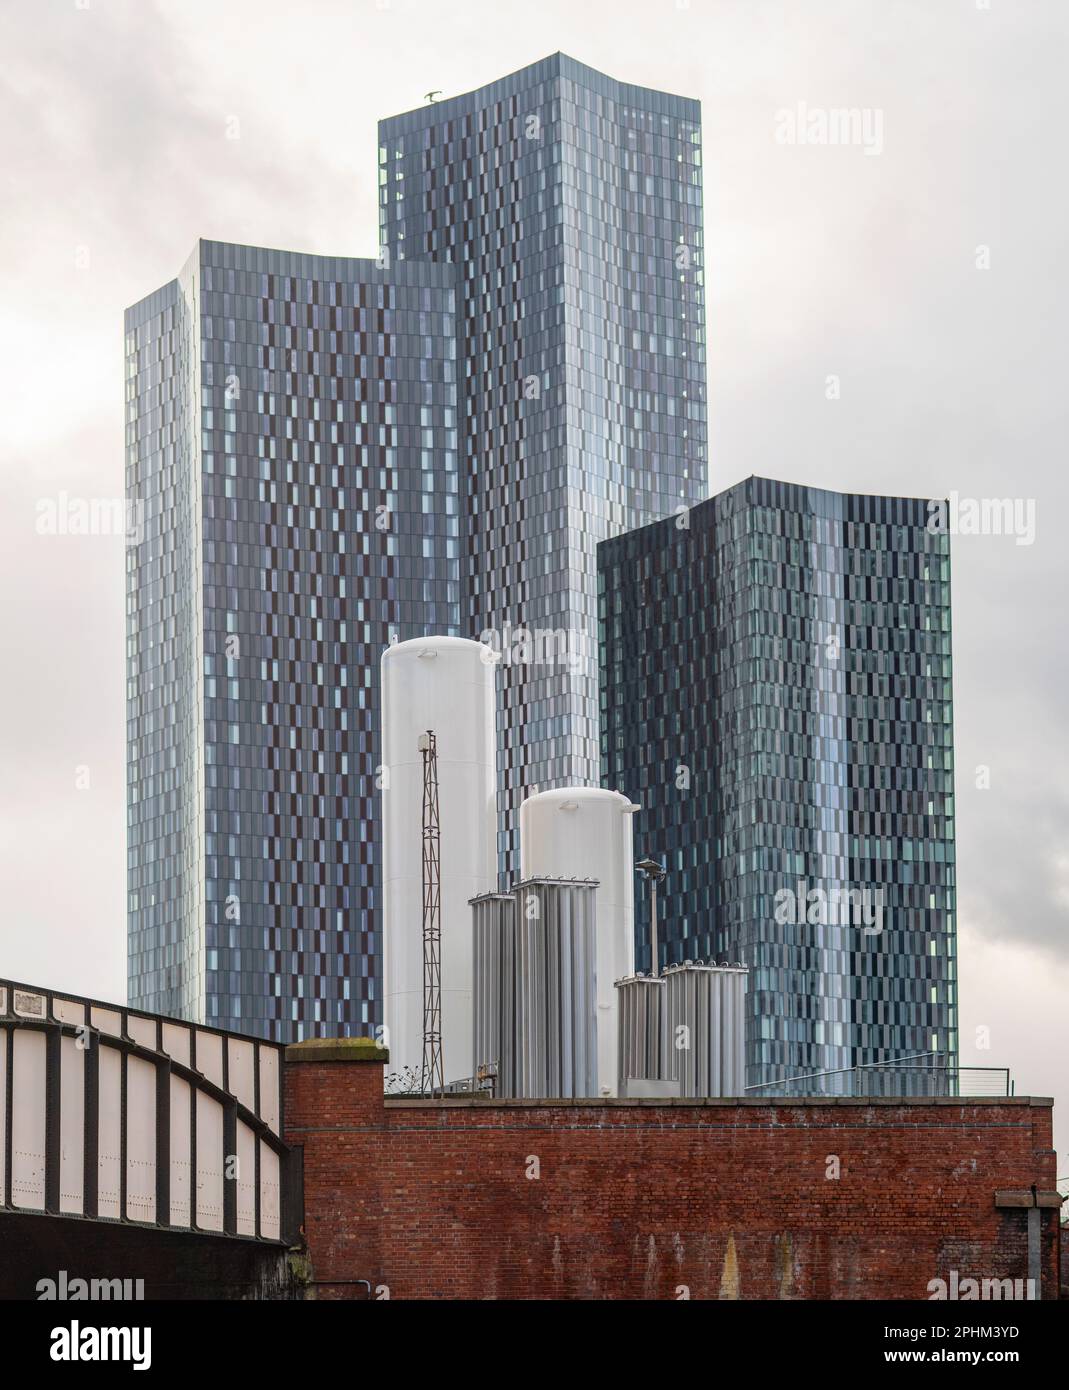 Containers for construction, holding cement, concreate to build towers like those beyond. Development of towers in Manchester city center Stock Photo